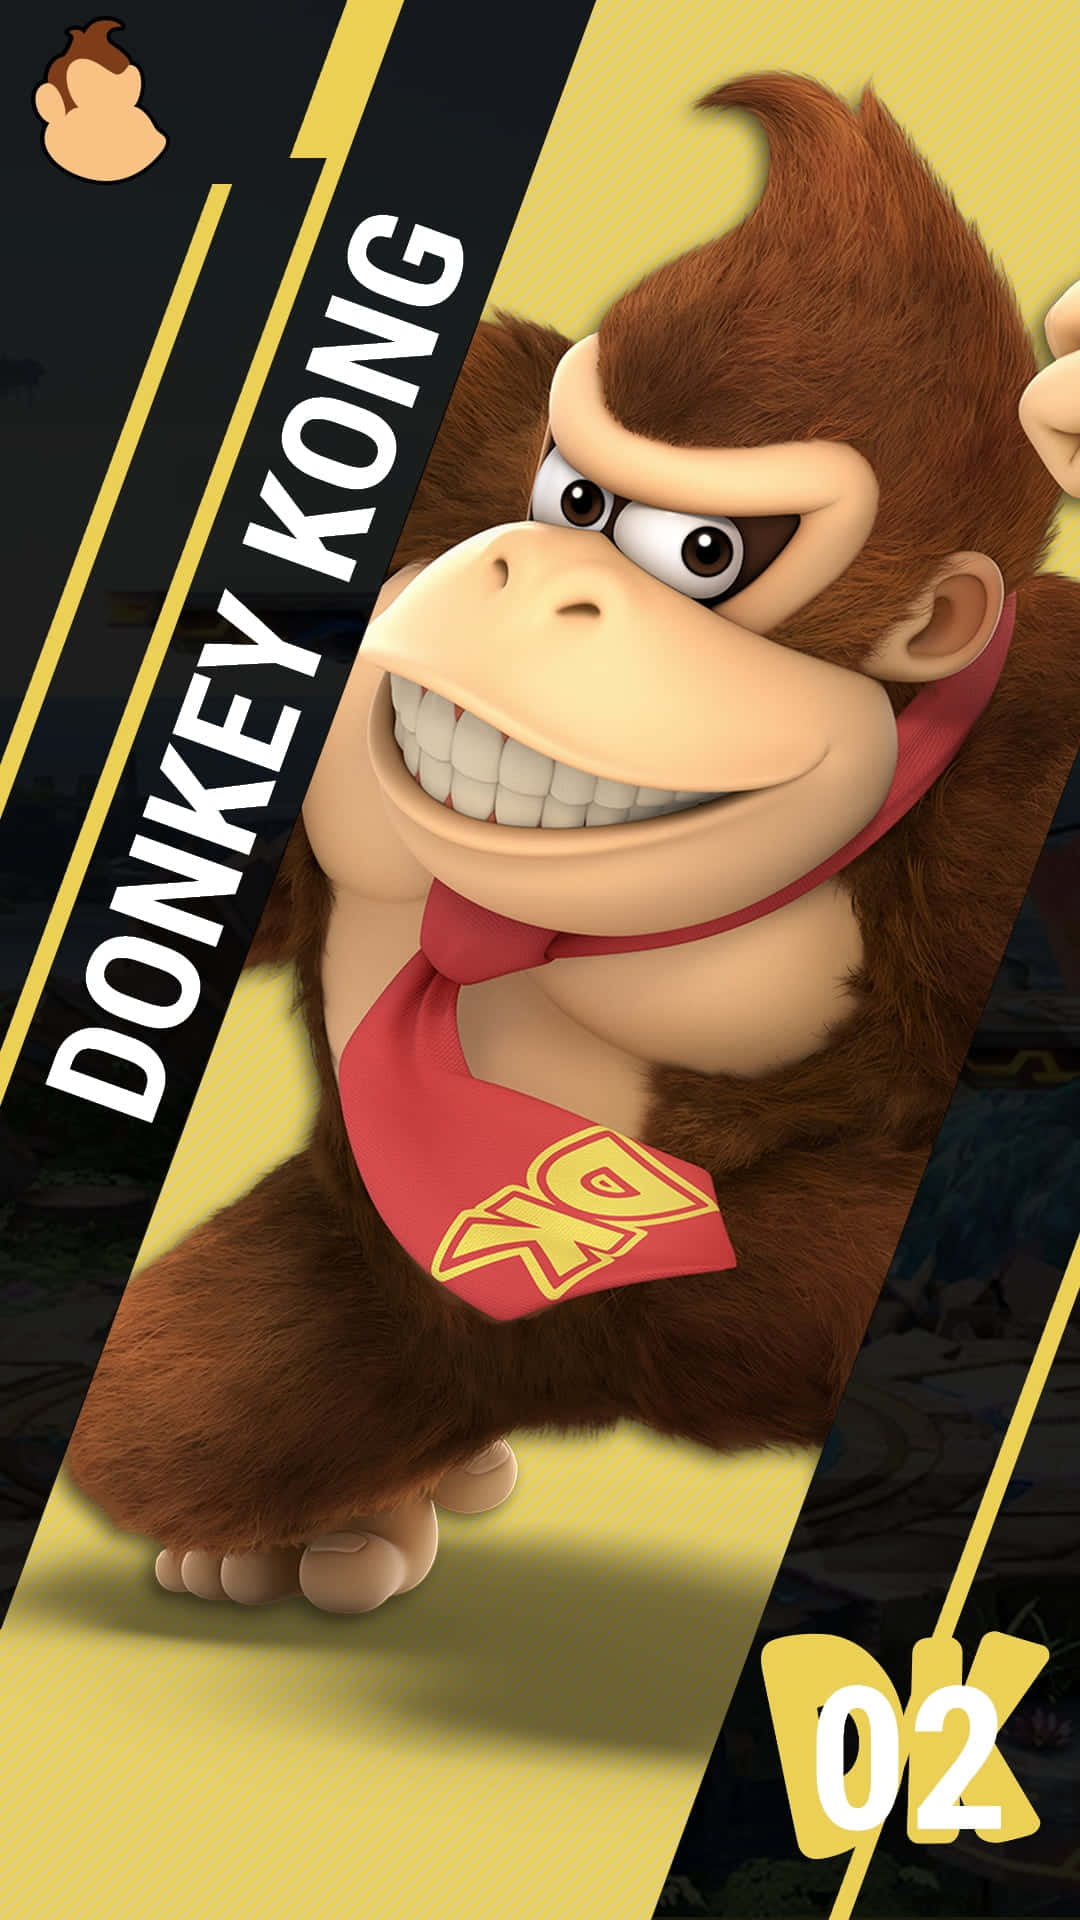 Donkey Kong In Action, Smashing His Way Through Obstacles